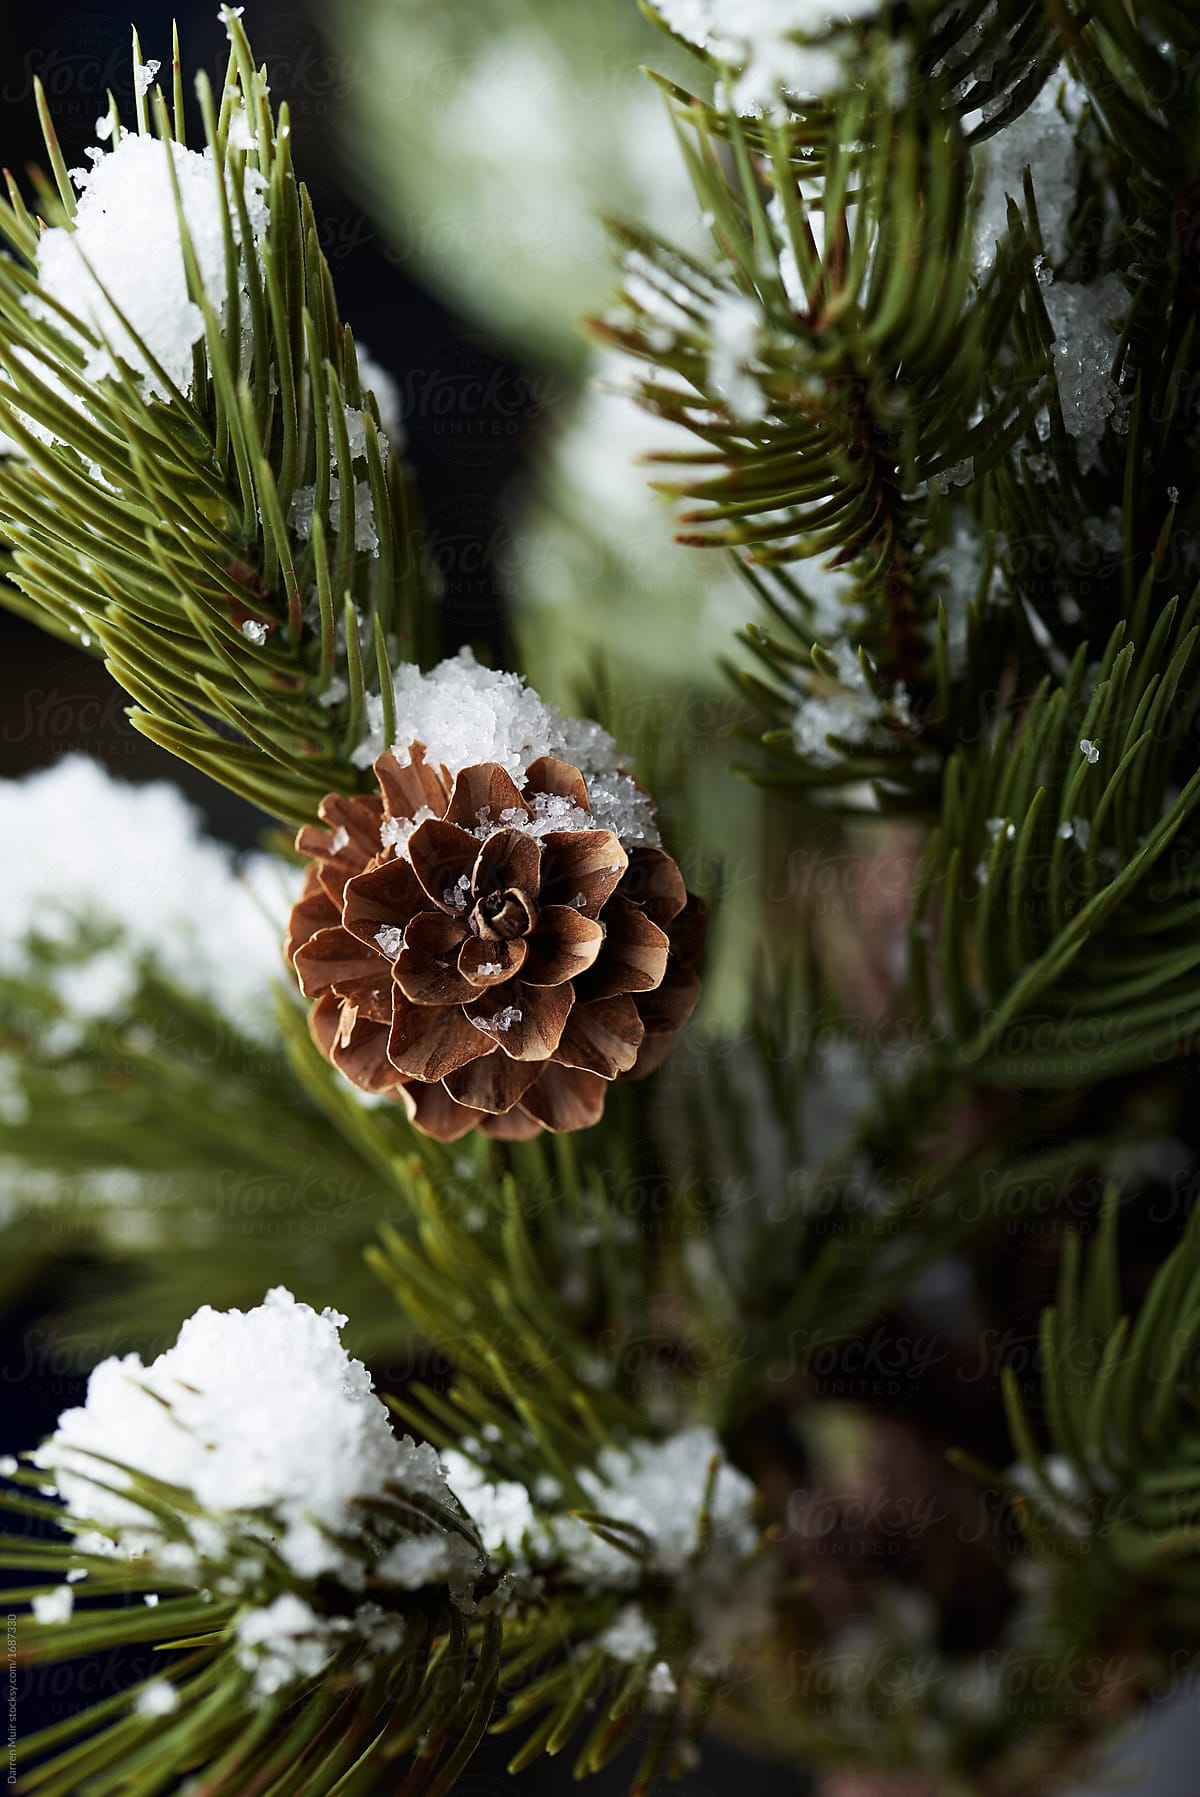 Snow on a pine cone.